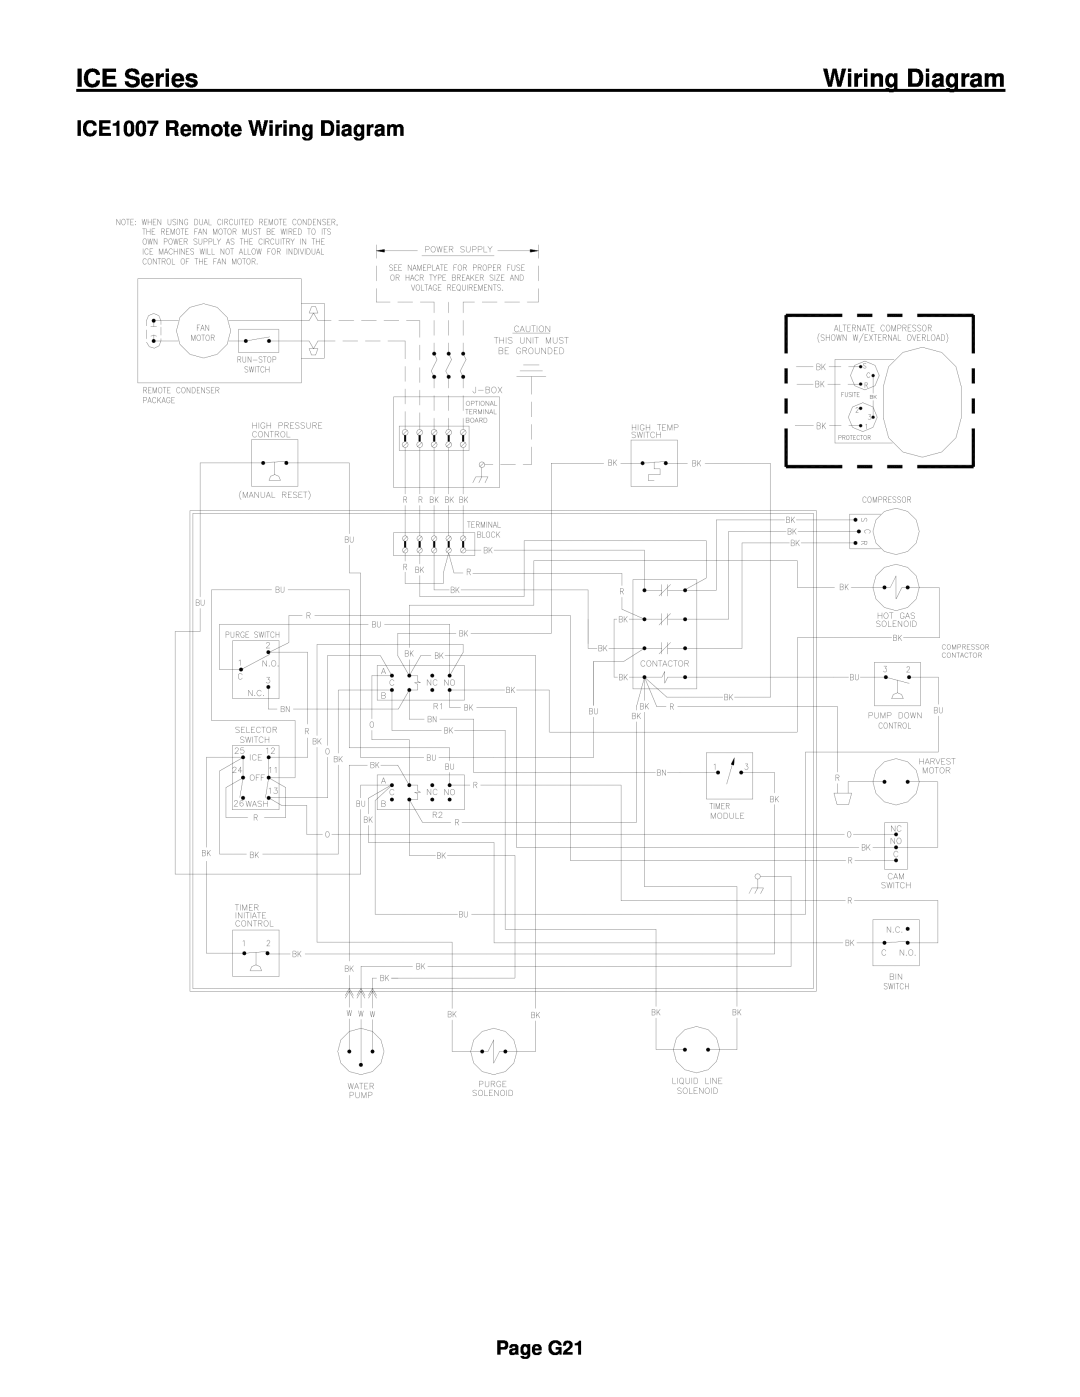 Ice-O-Matic ICE0250 Series installation manual ICE1007 Remote Wiring Diagram, ICE Series, Page G21 